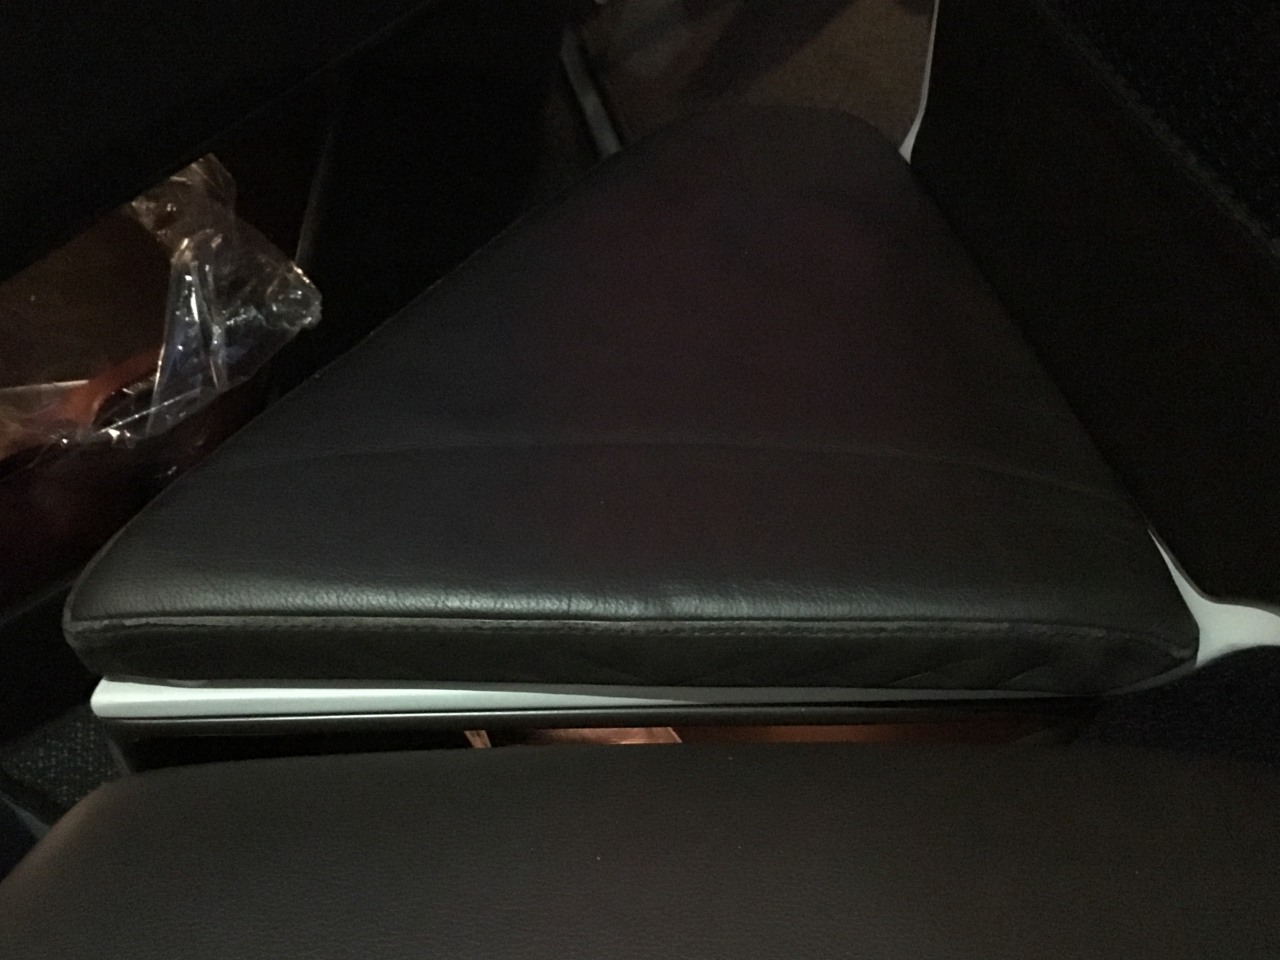 Hawaiian Airlines A330 First Class Review: Gap Between Seat and Ottoman